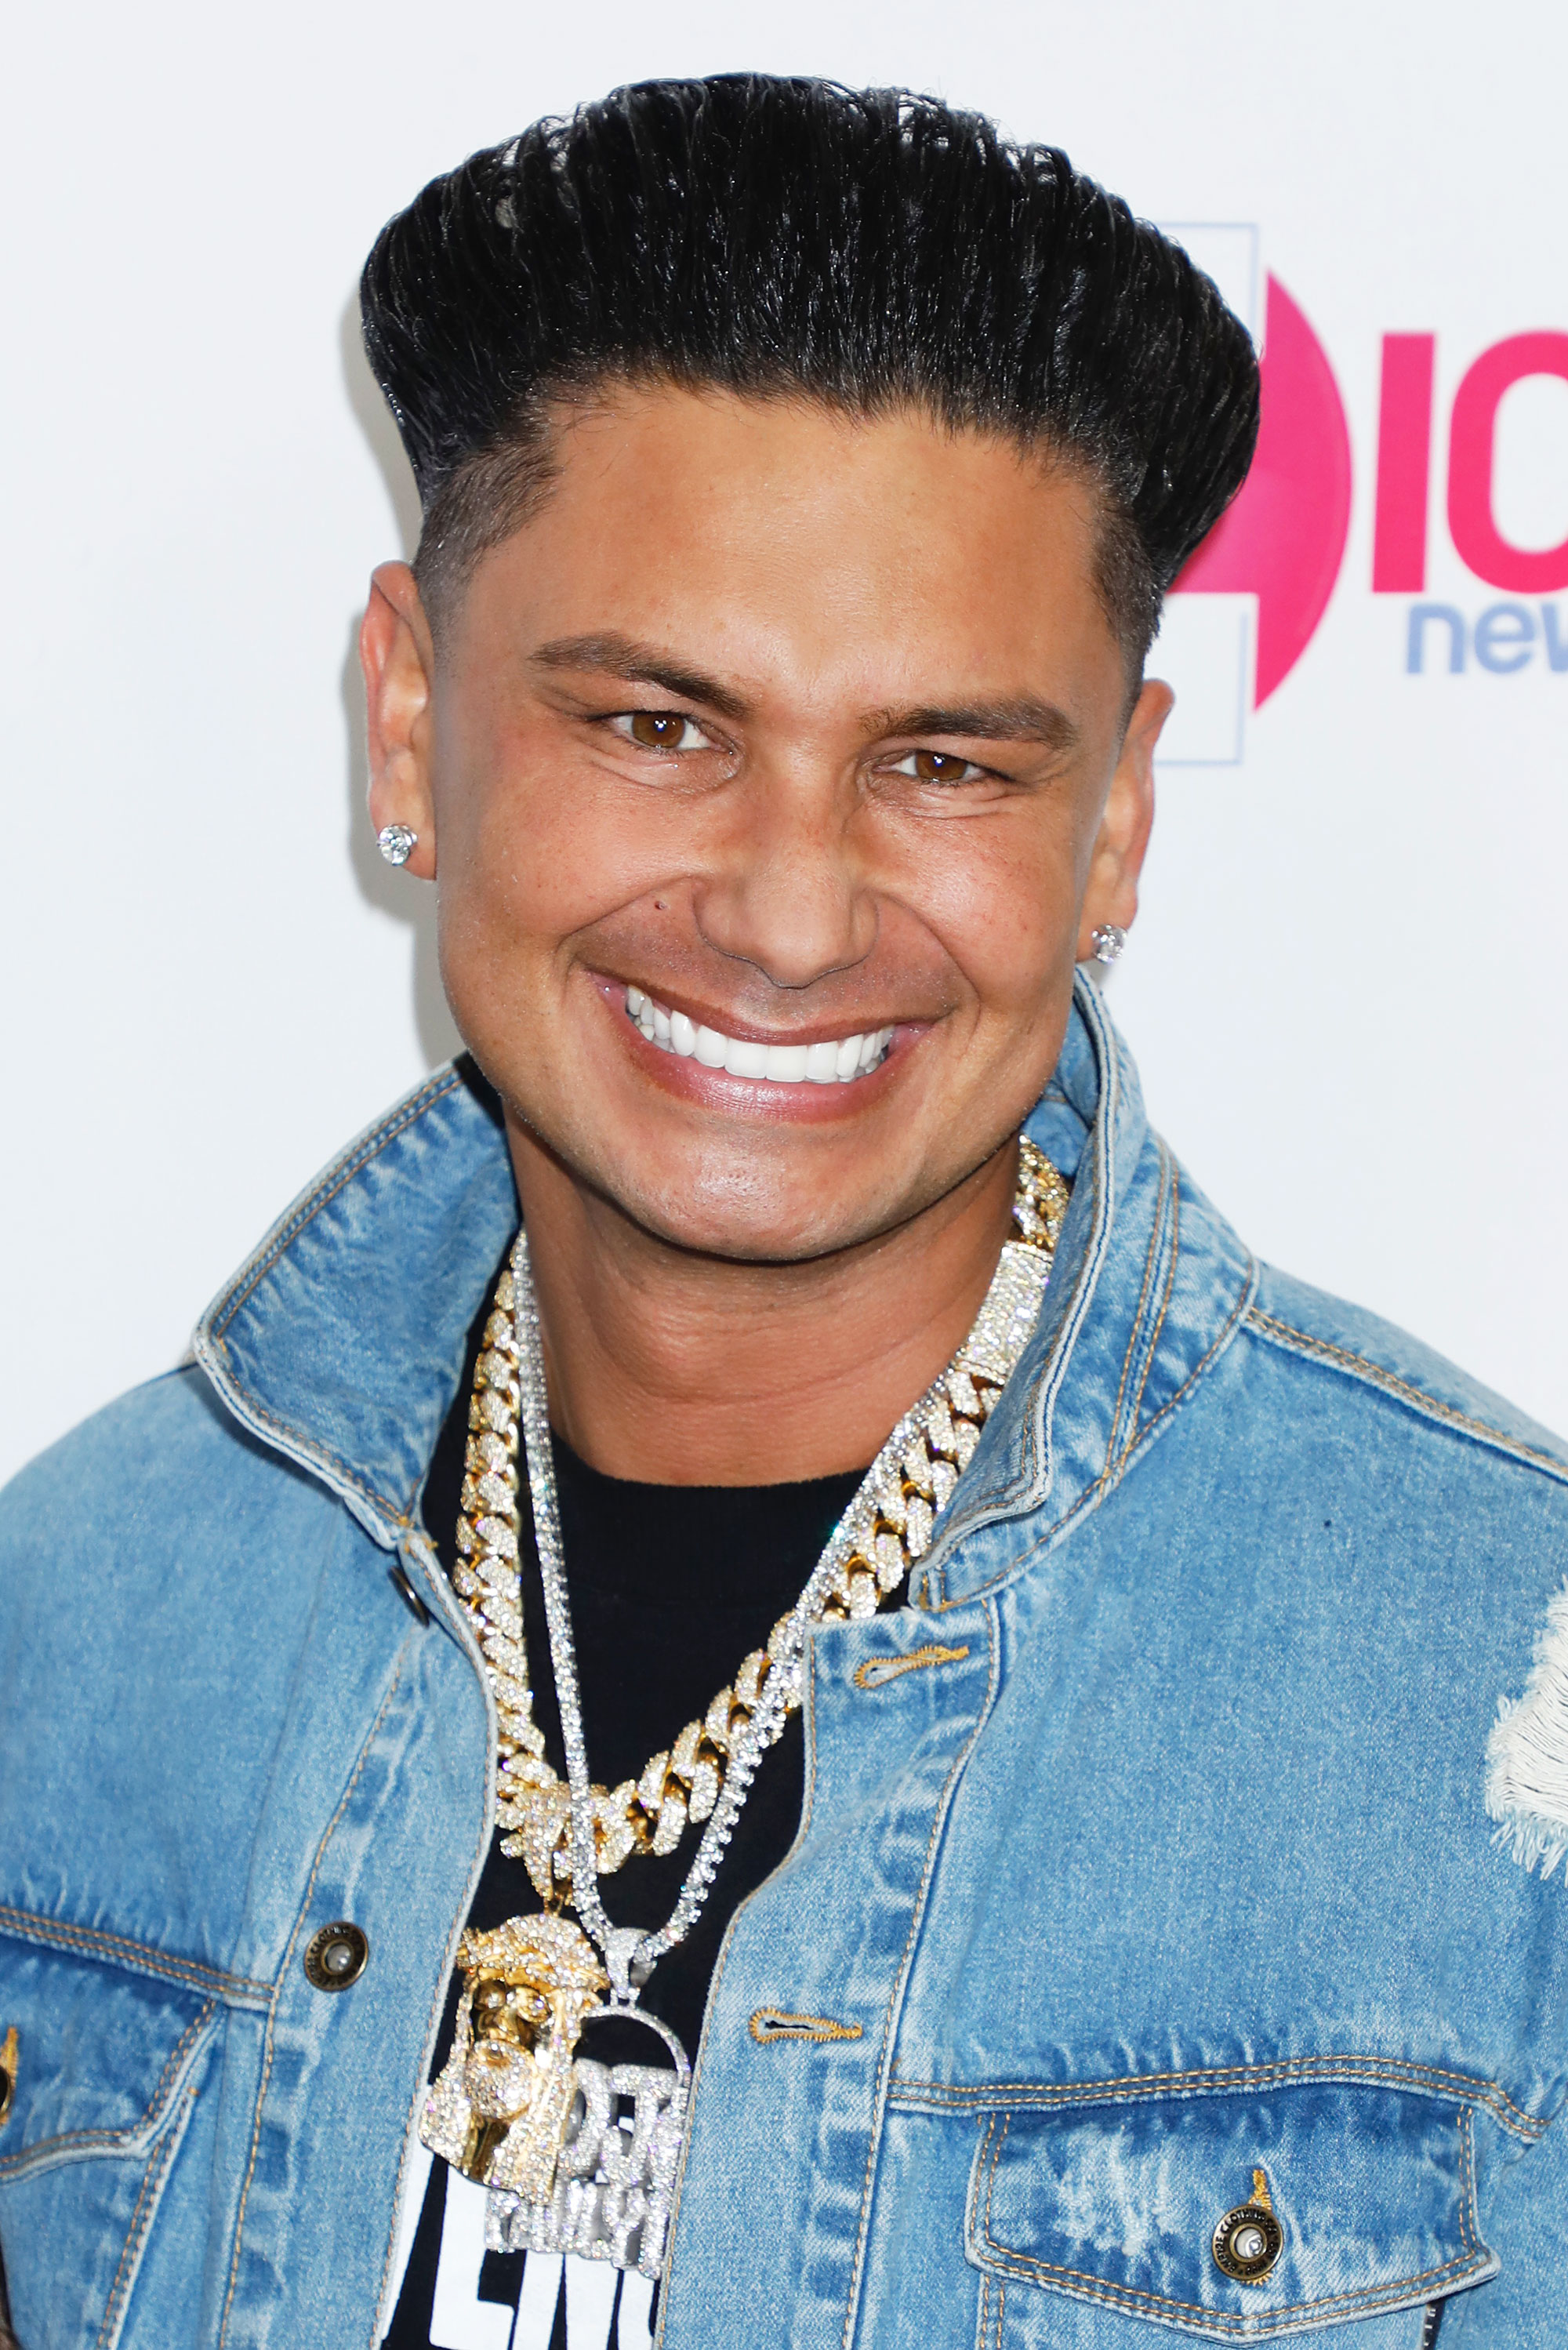 DJ Pauly D Teams Up With Got2b So You Can Cop His Signature Blowout I.